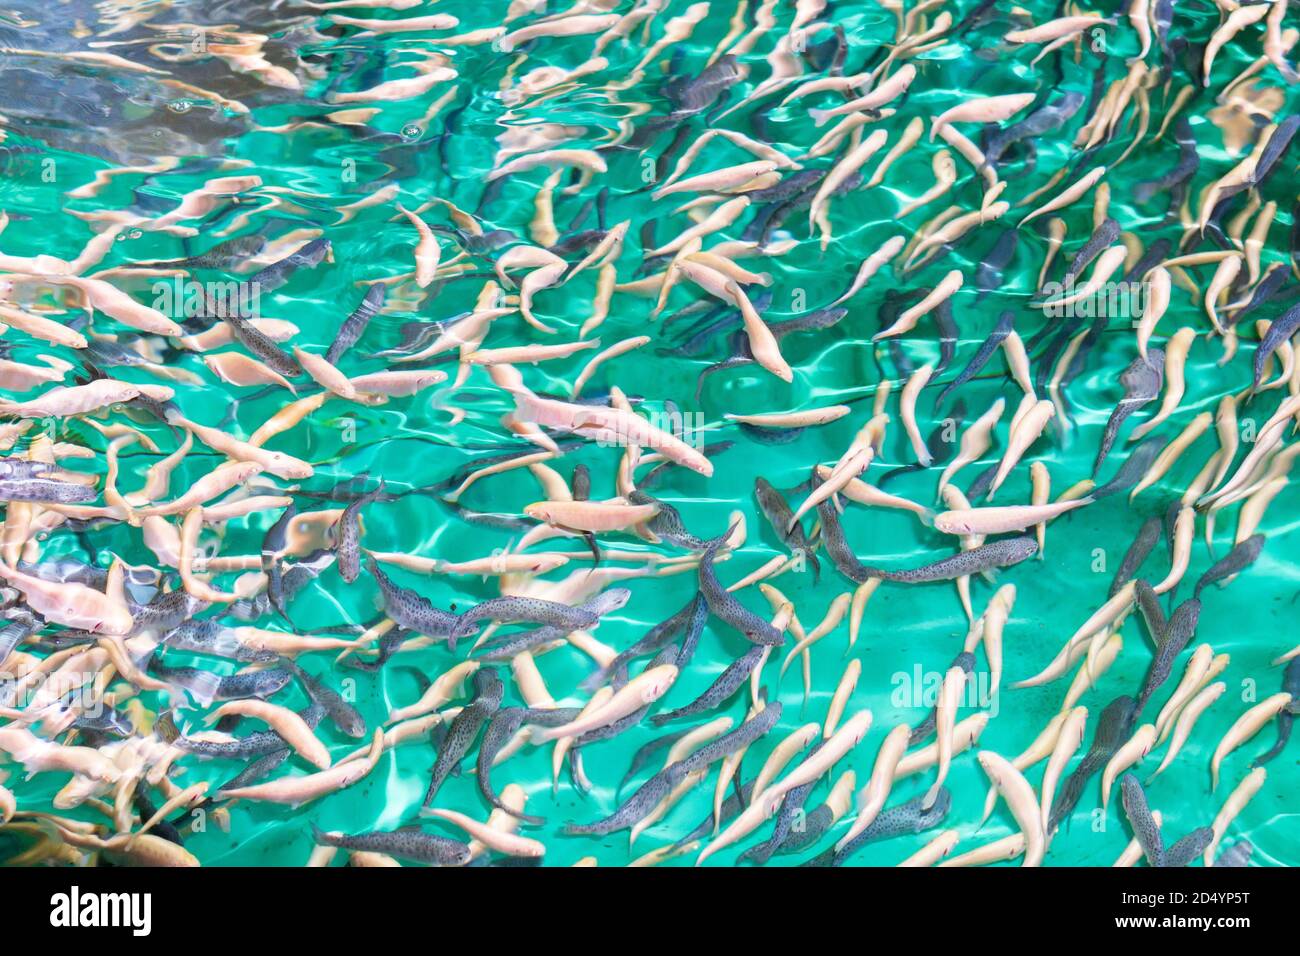 flock fish in a trout farm. Breeding trout for the food industry. Trout farming, fishing, freshwater fish farming. Stock Photo